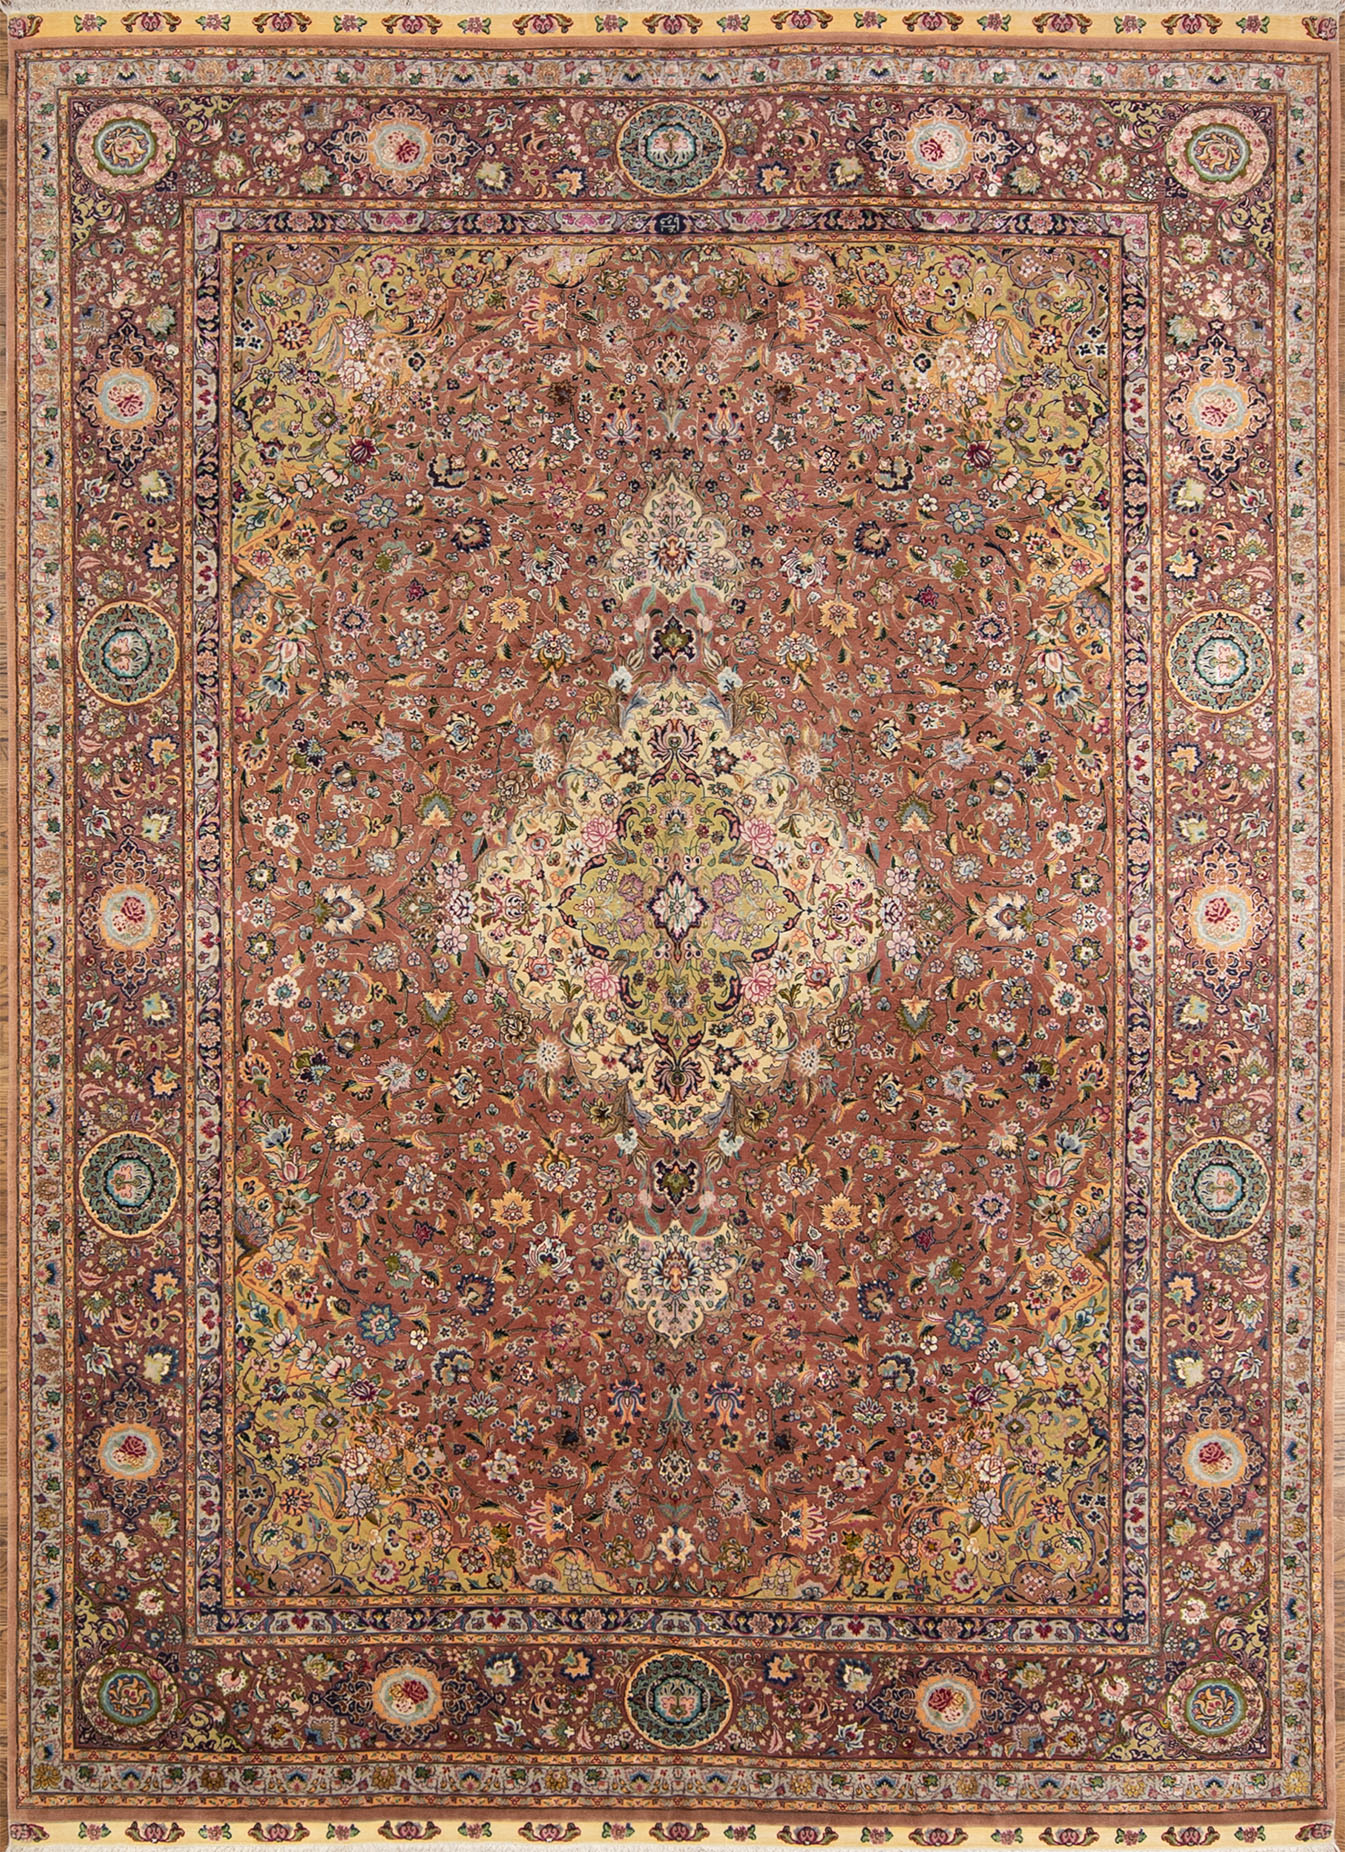 Colorful Persian rug. Beautiful hand knotted floral Persian Tabriz rug in mauve and purple colors made of wool and silk. Size 8.2x11.7.